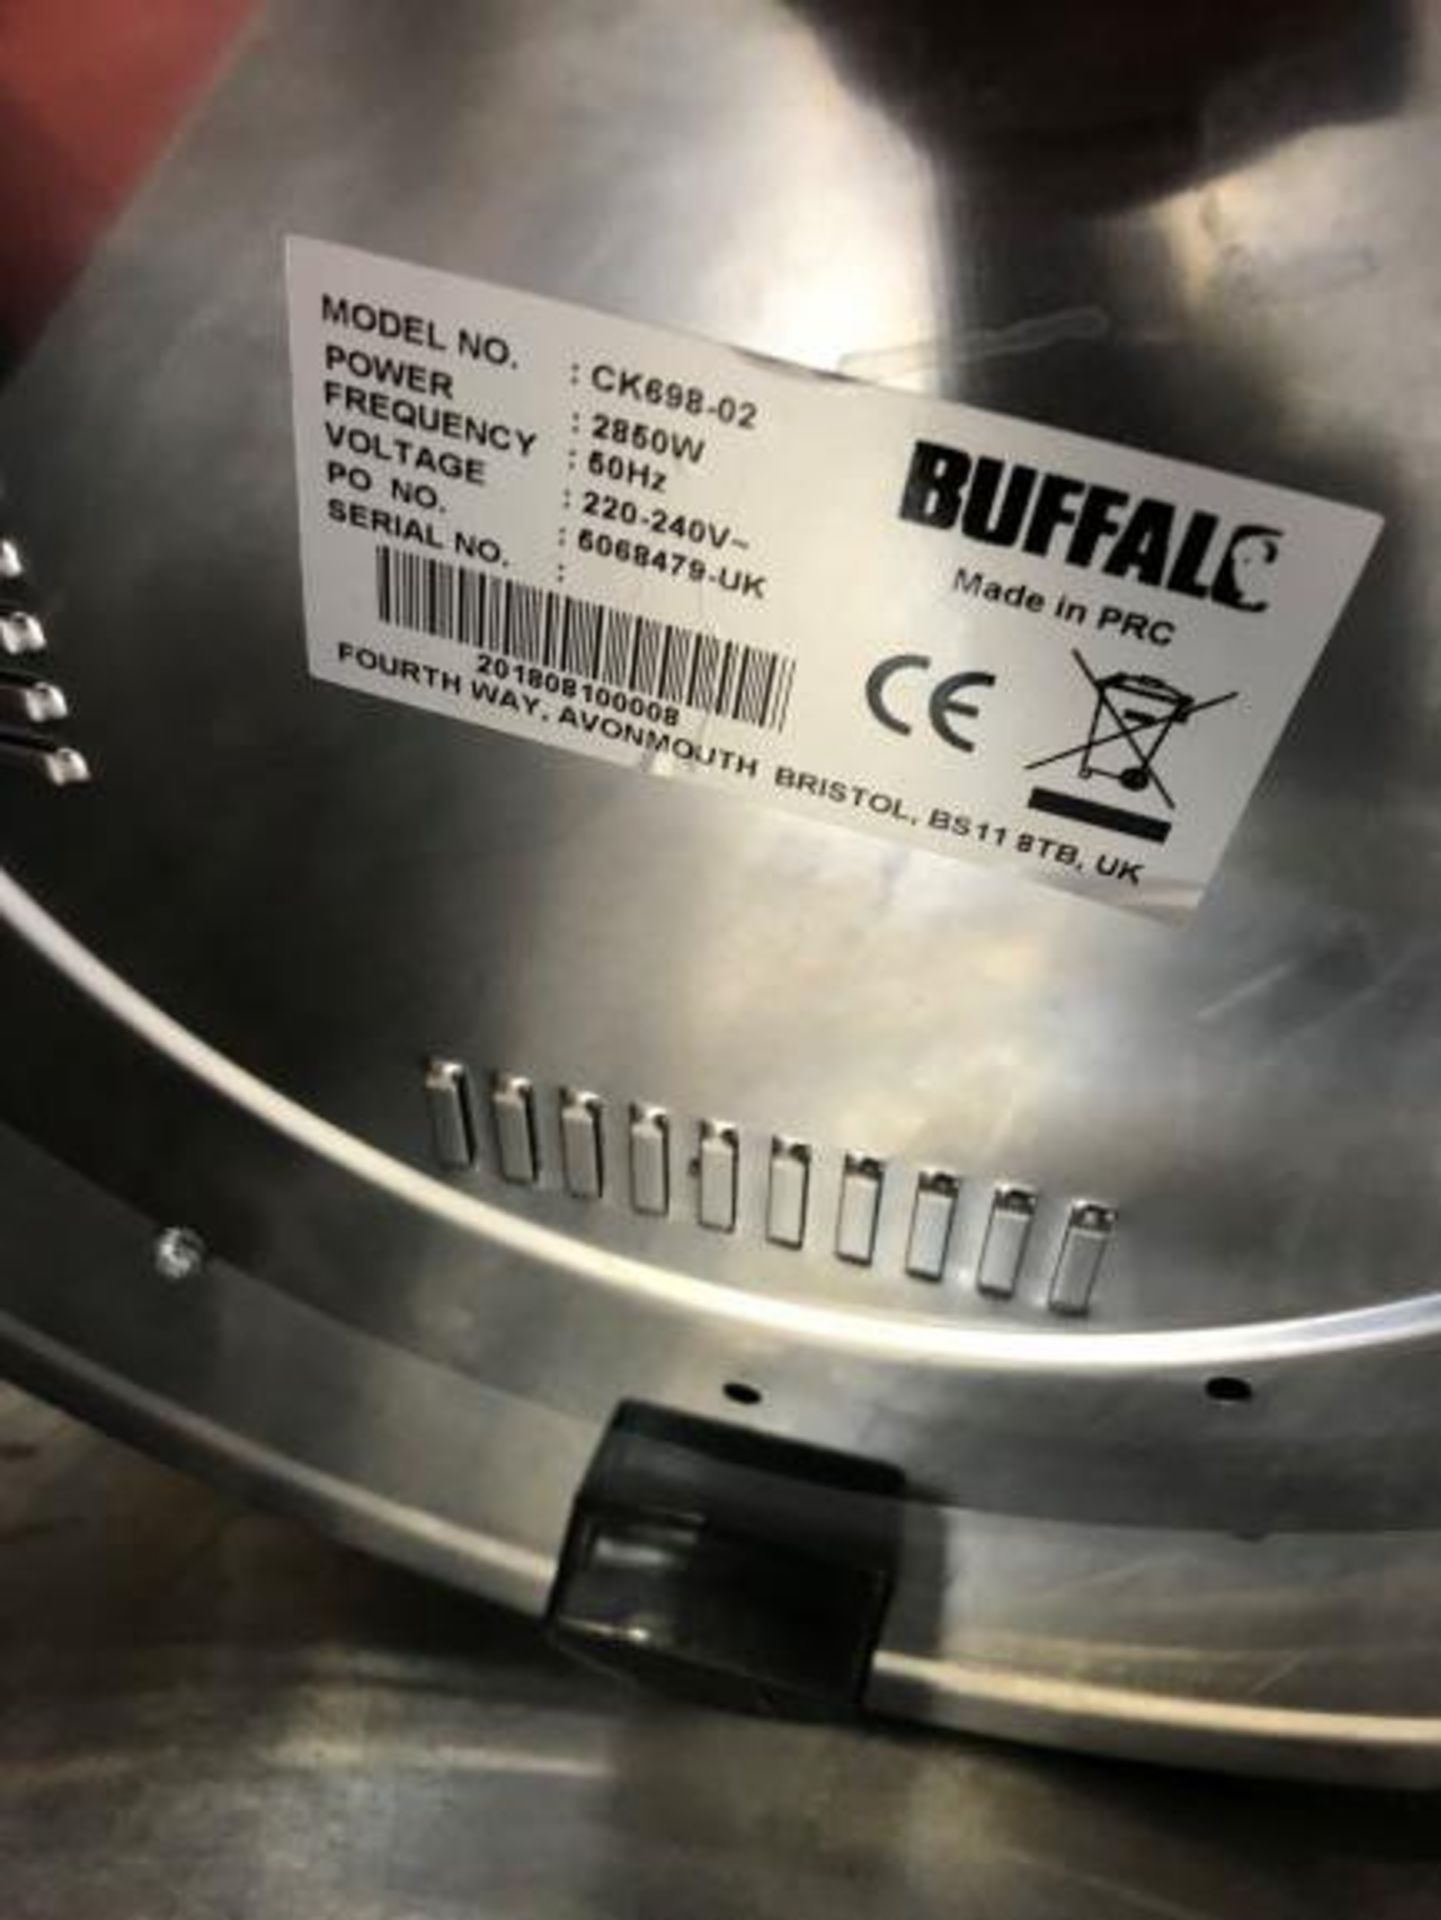 Buffalo CK698-02 9 Litre stainless steel commercial rice cooker - Image 2 of 3